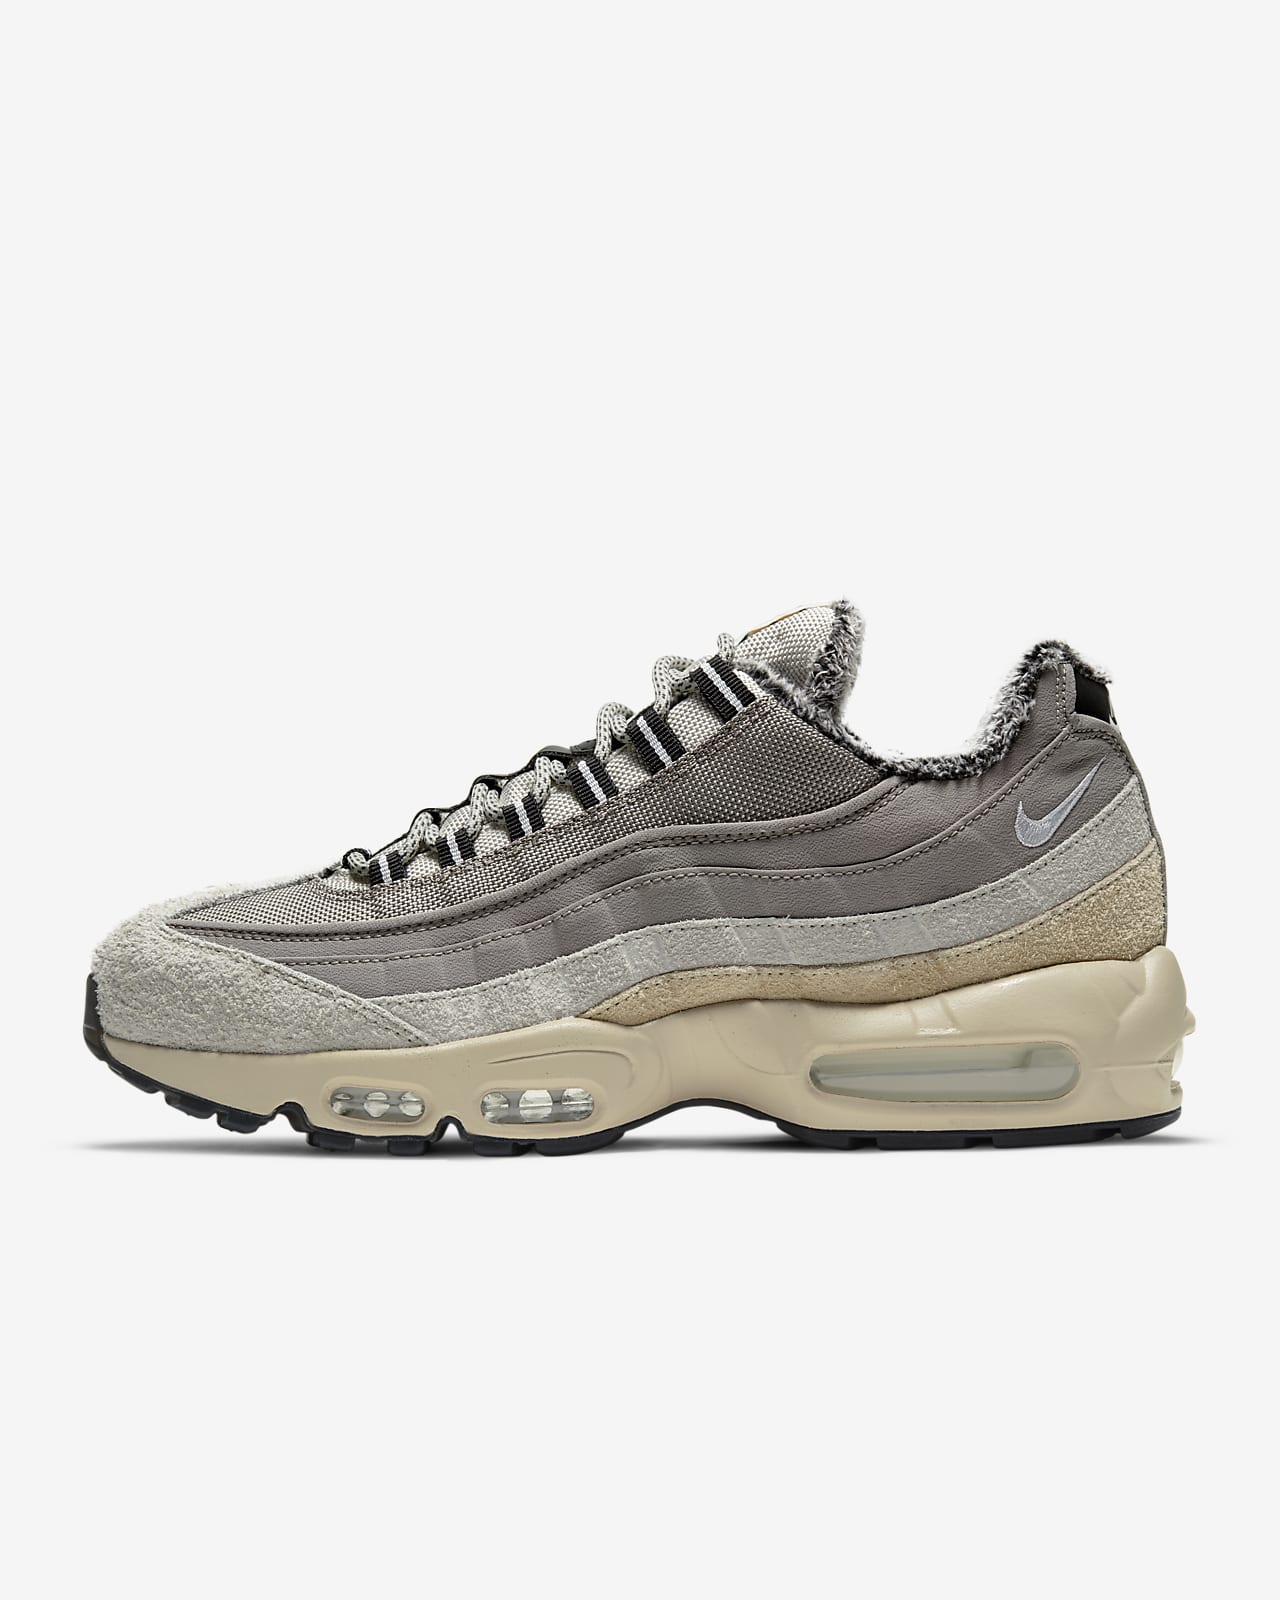 limited edition 95s